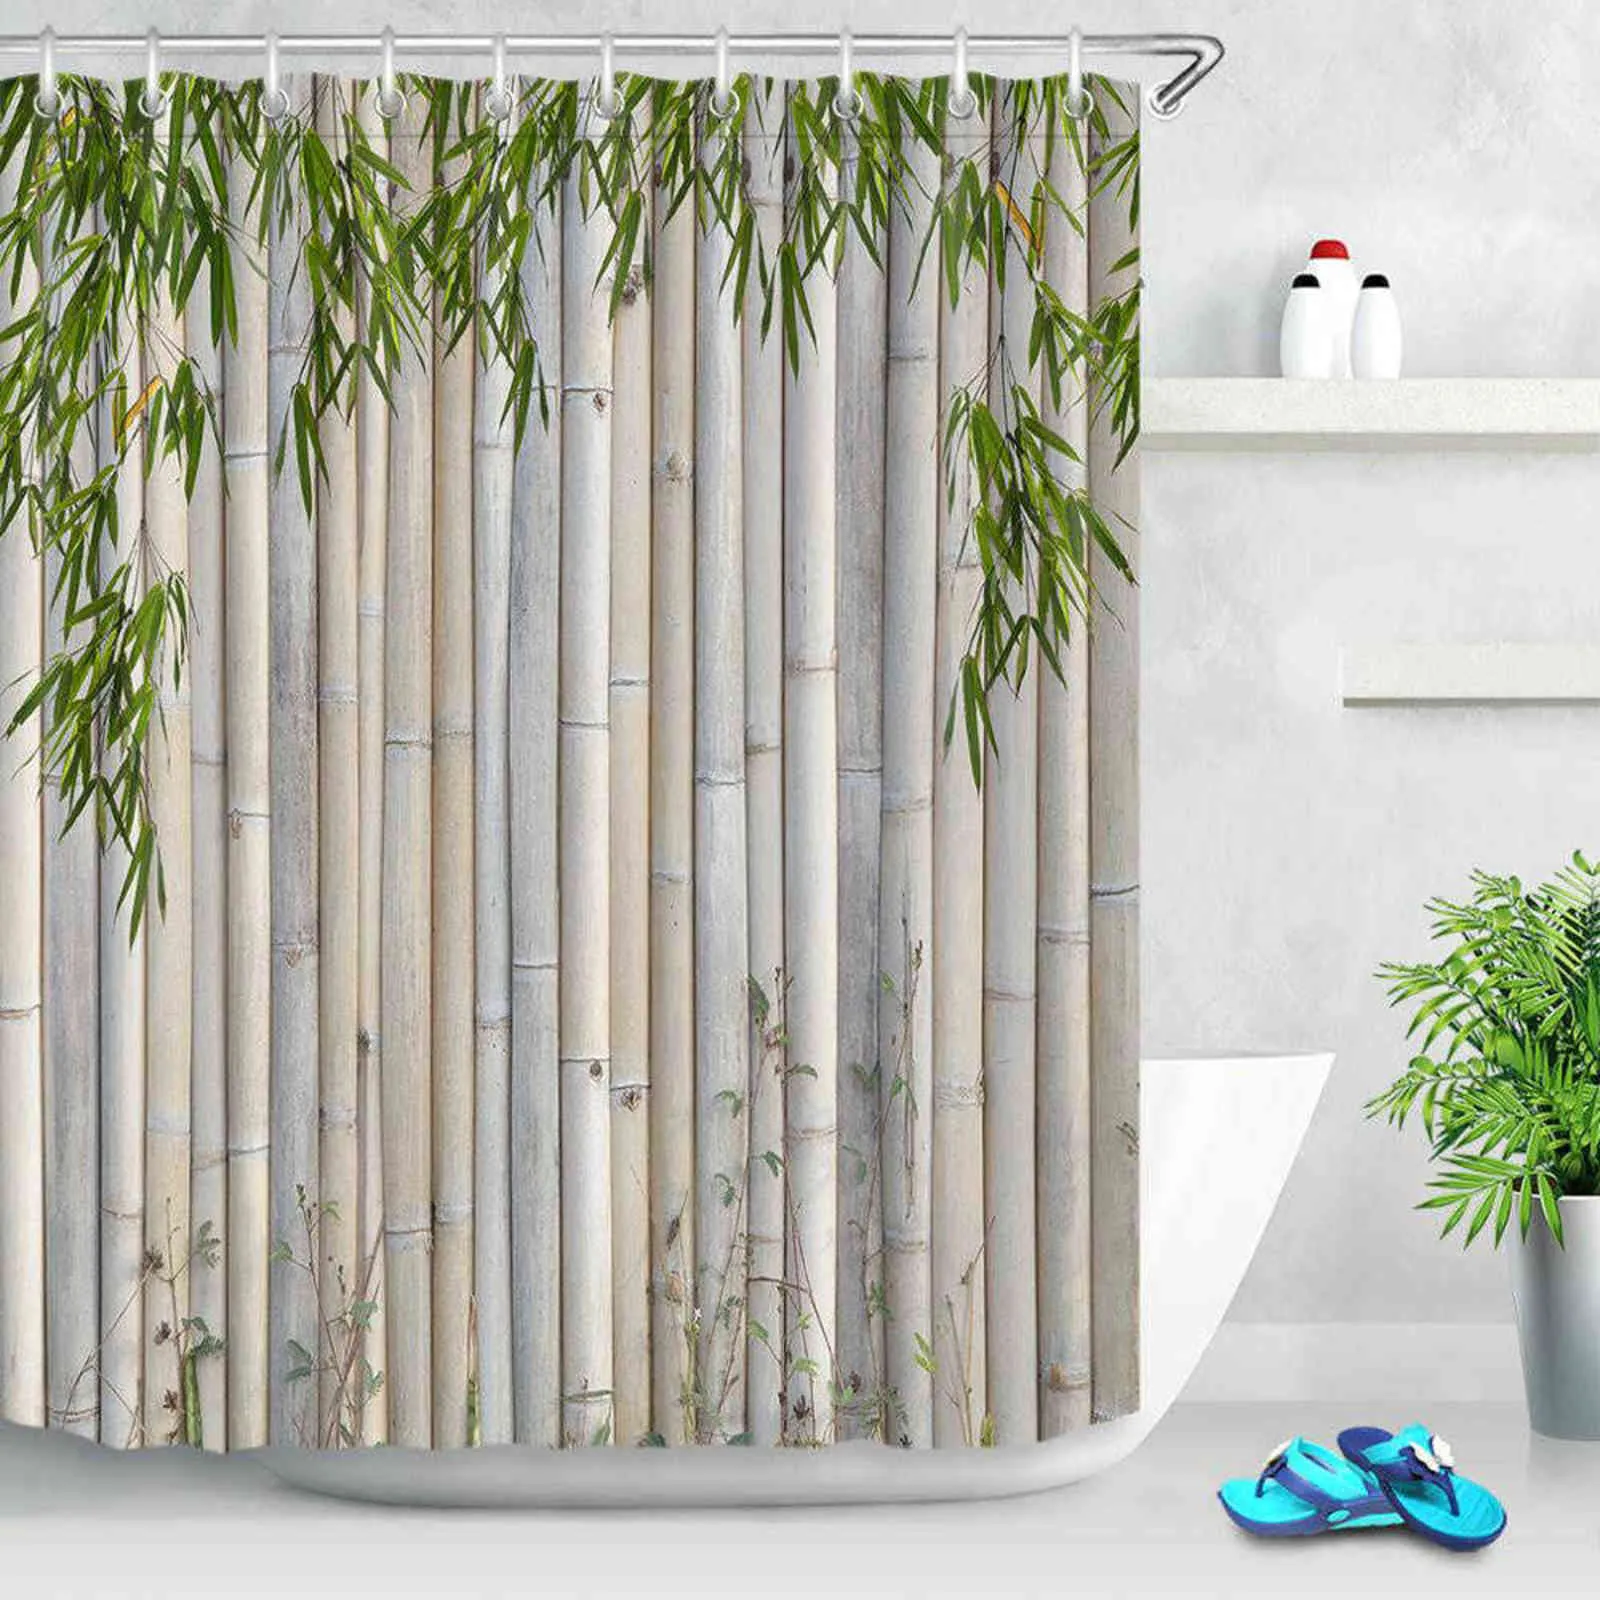 Green Bamboo Shower Curtains Black Stone White Candle Zen Garden Scenery Home Wall Decor Bathroom Fabric Bath Curtain With Hooks 211116